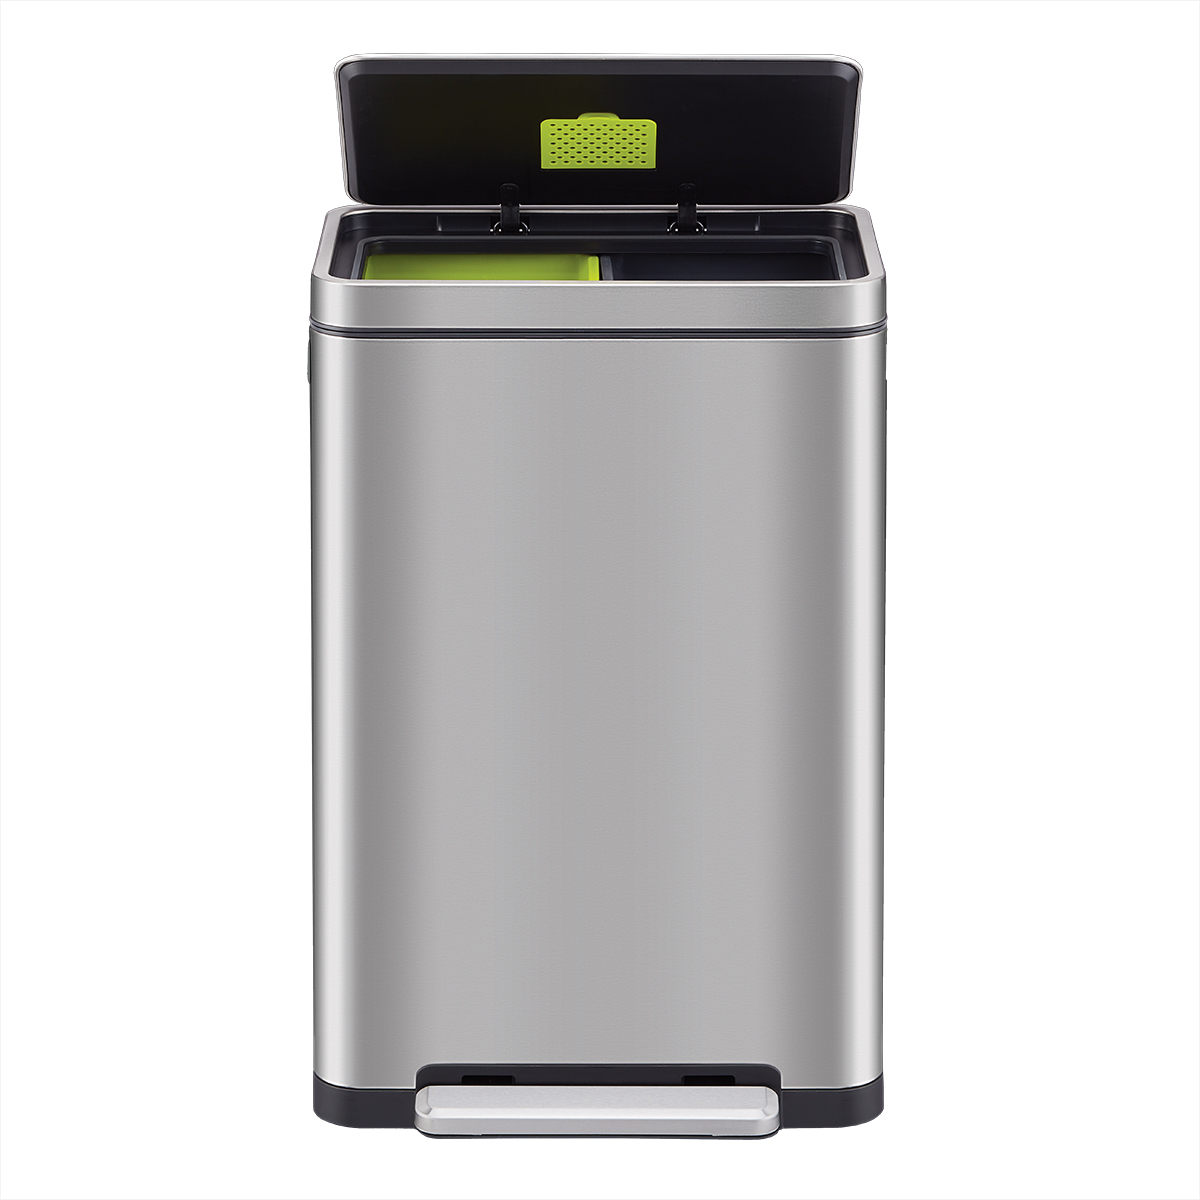 gal Dual Function XL Plastic Divided Kitchen Trash Can, Black